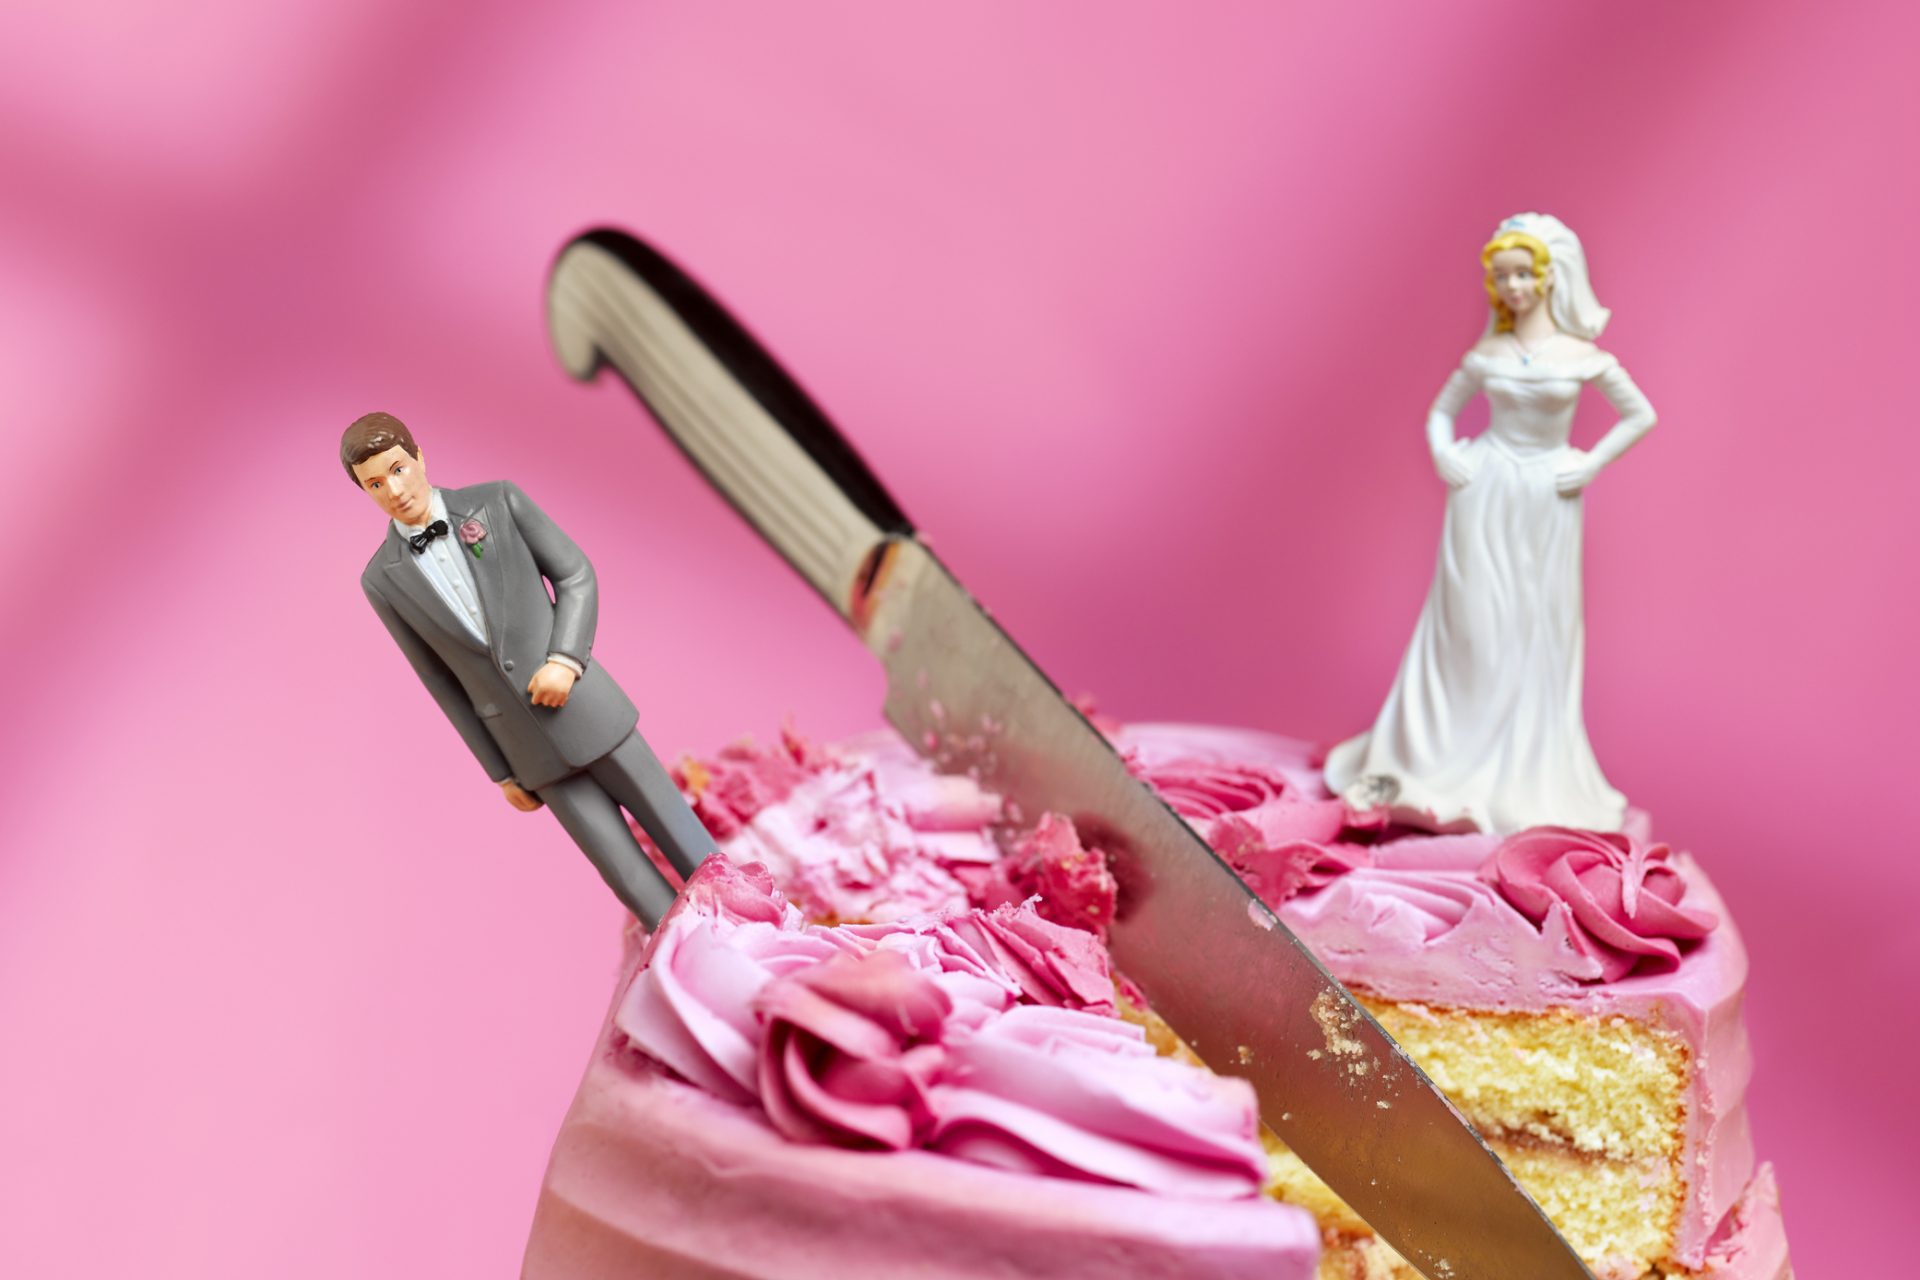 New study makes worrying findings about premarital promiscuity and divorce